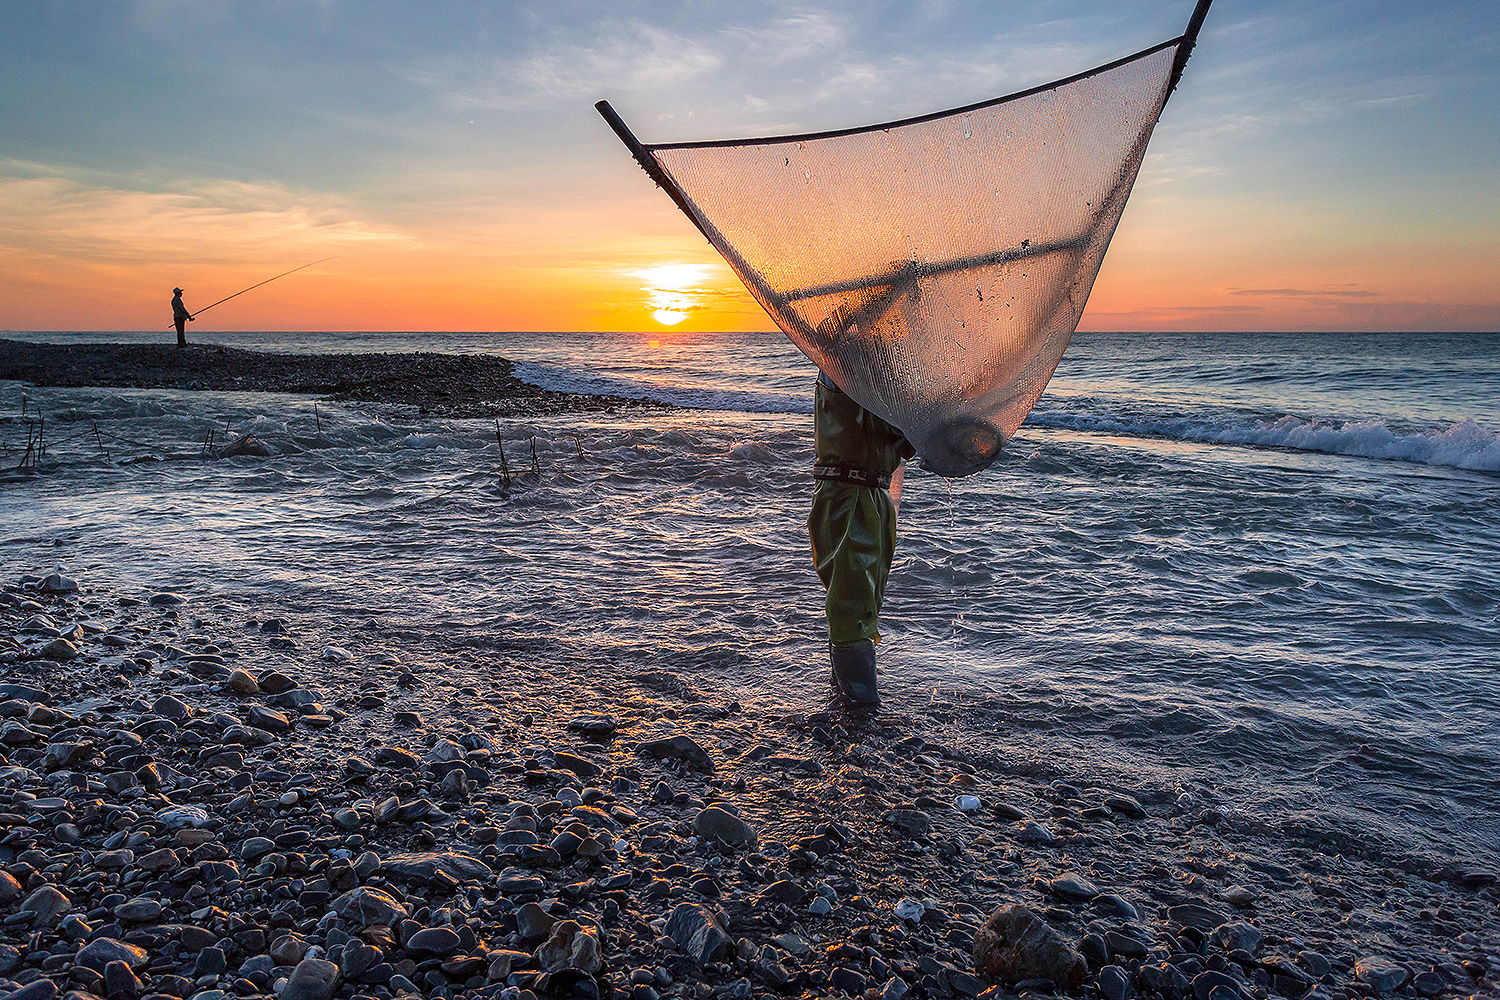 “Fishing at Dawn” by Brandon Ho, ‘18 / Jinlun, Taitung, Taiwan “I was interested in the traditional methods of fishermen using a triangle net to catch fish so I woke up and spent the morning photographing them and learning more about their lives.”